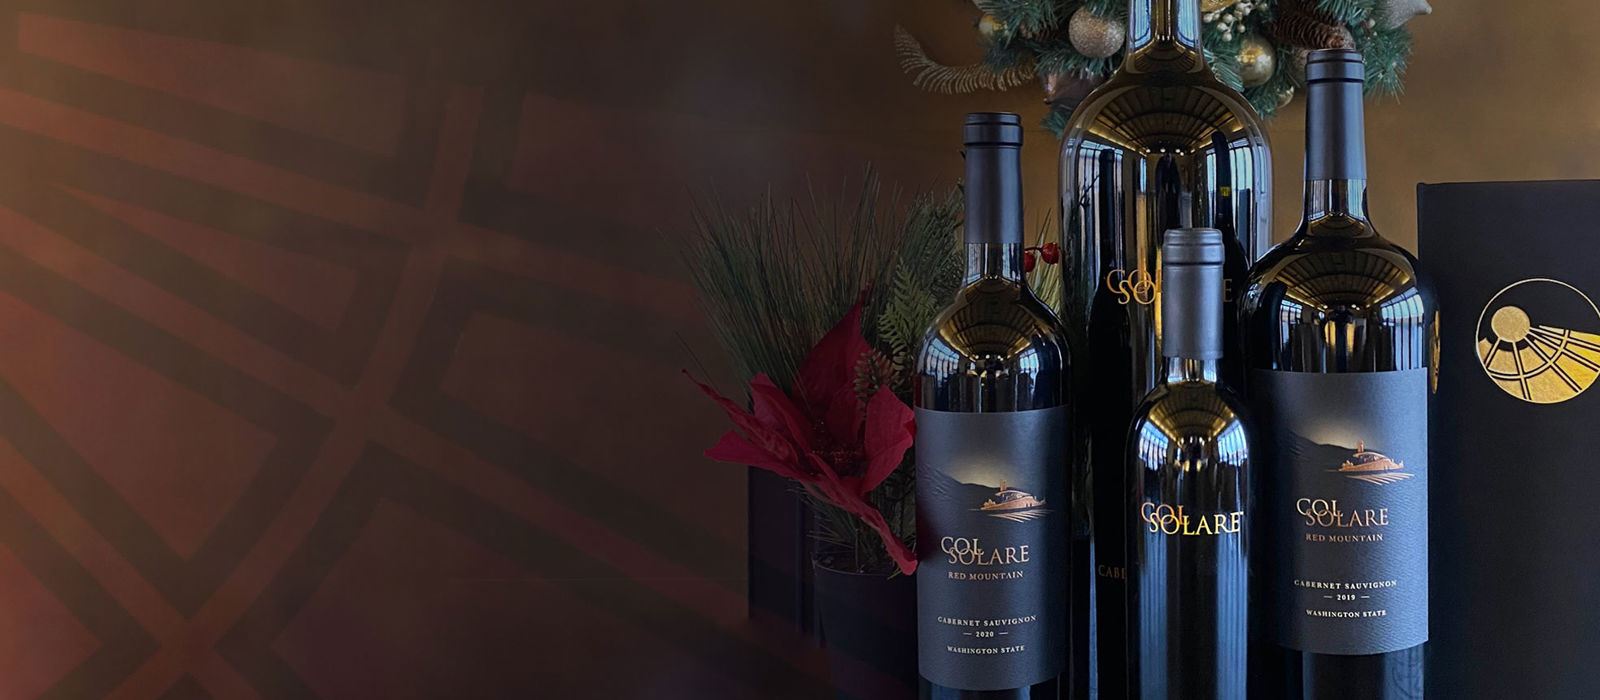 Bottles of Col Solare wine in front of a holiday wreath